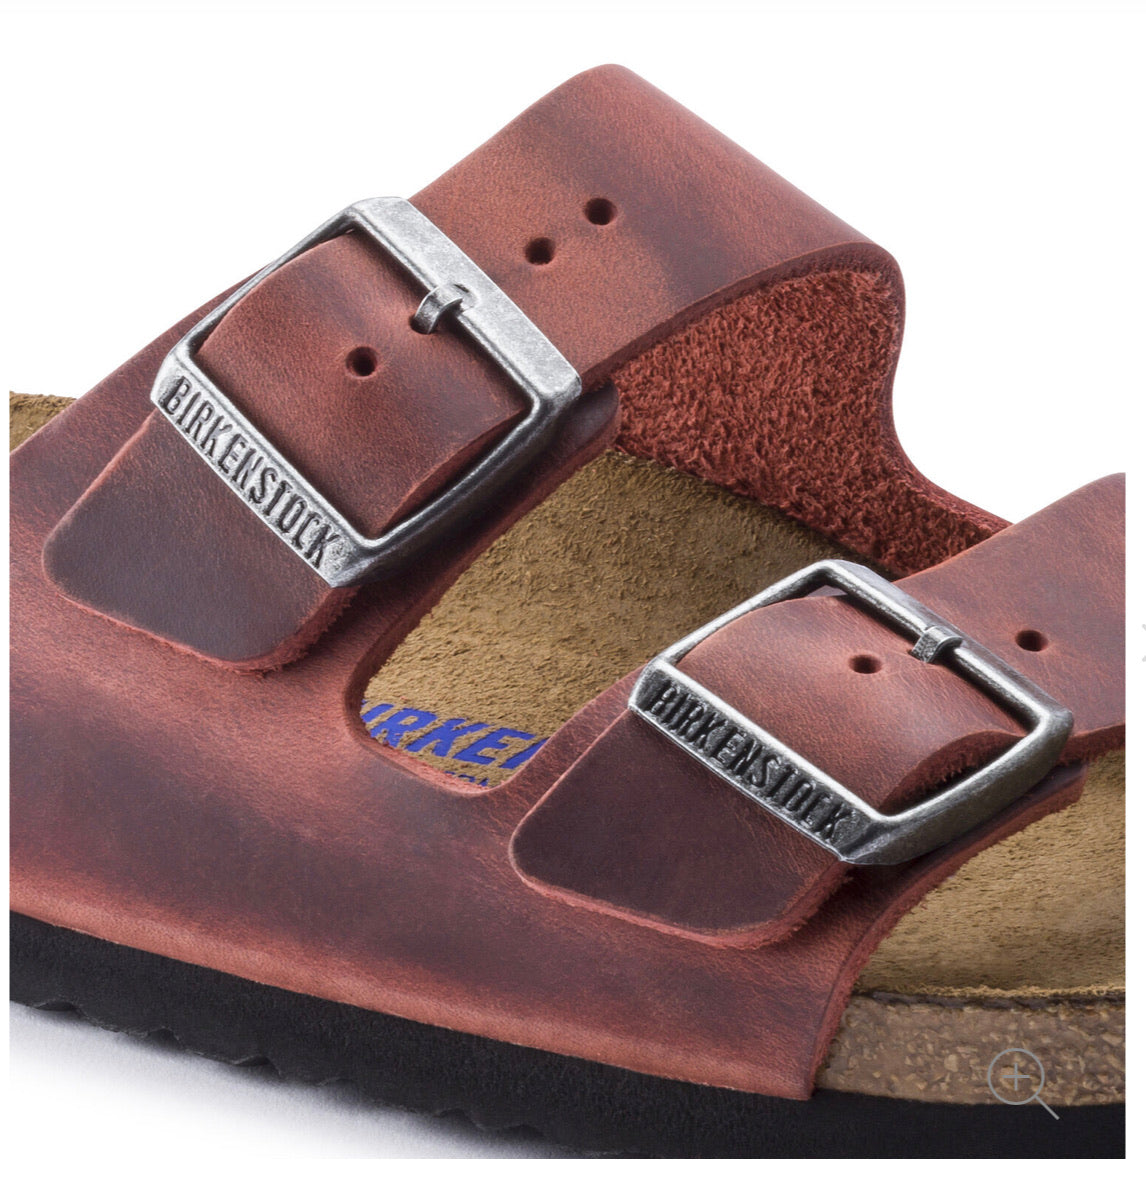 Birkenstock Arizona Earth Red Oiled Leather Soft Footbed Made In Germany